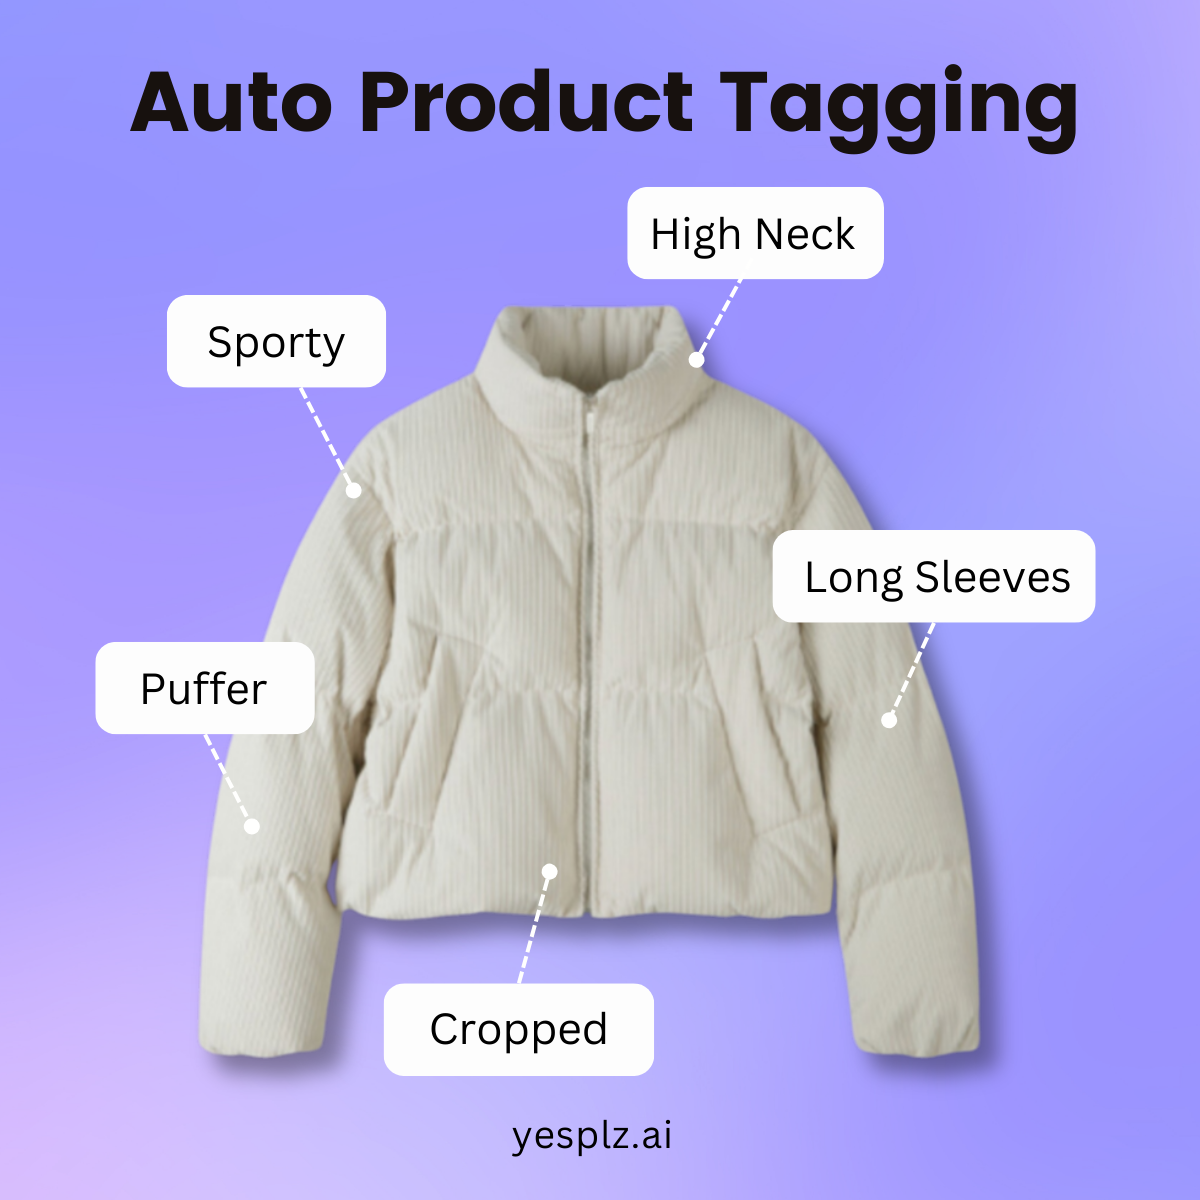 AI in fashion eCommerce for auto product tagging